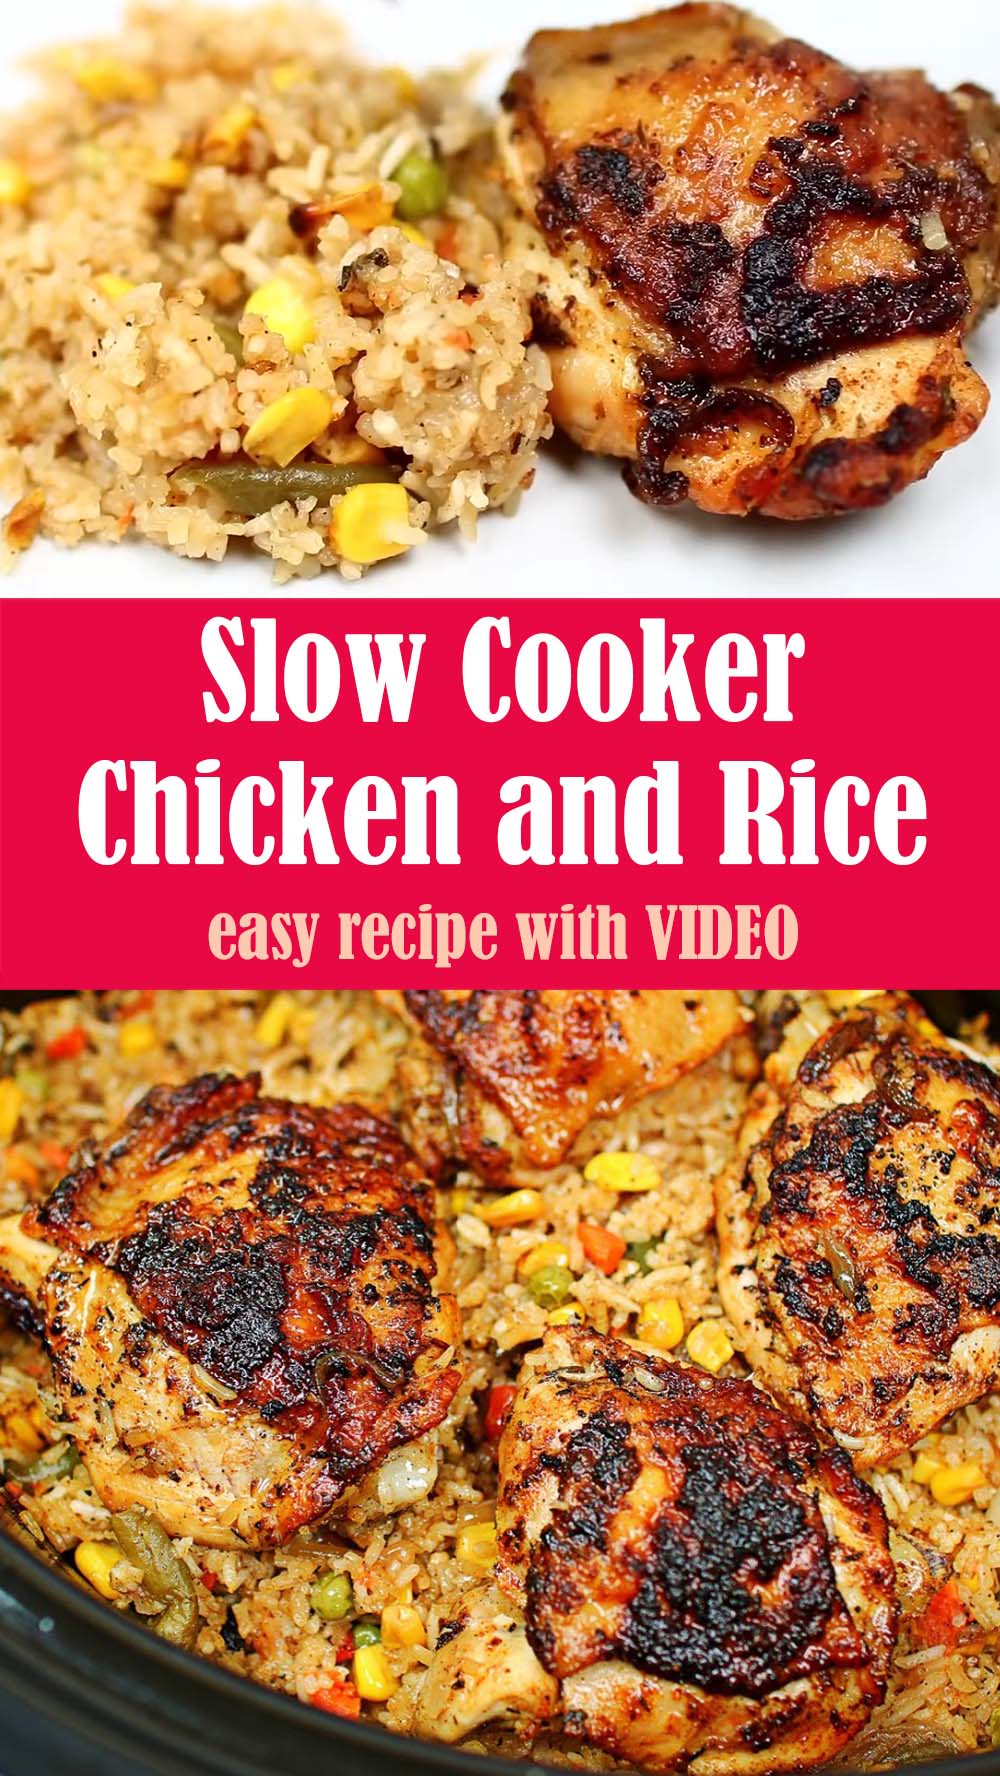 Slow Cooker Chicken and Rice Recipe